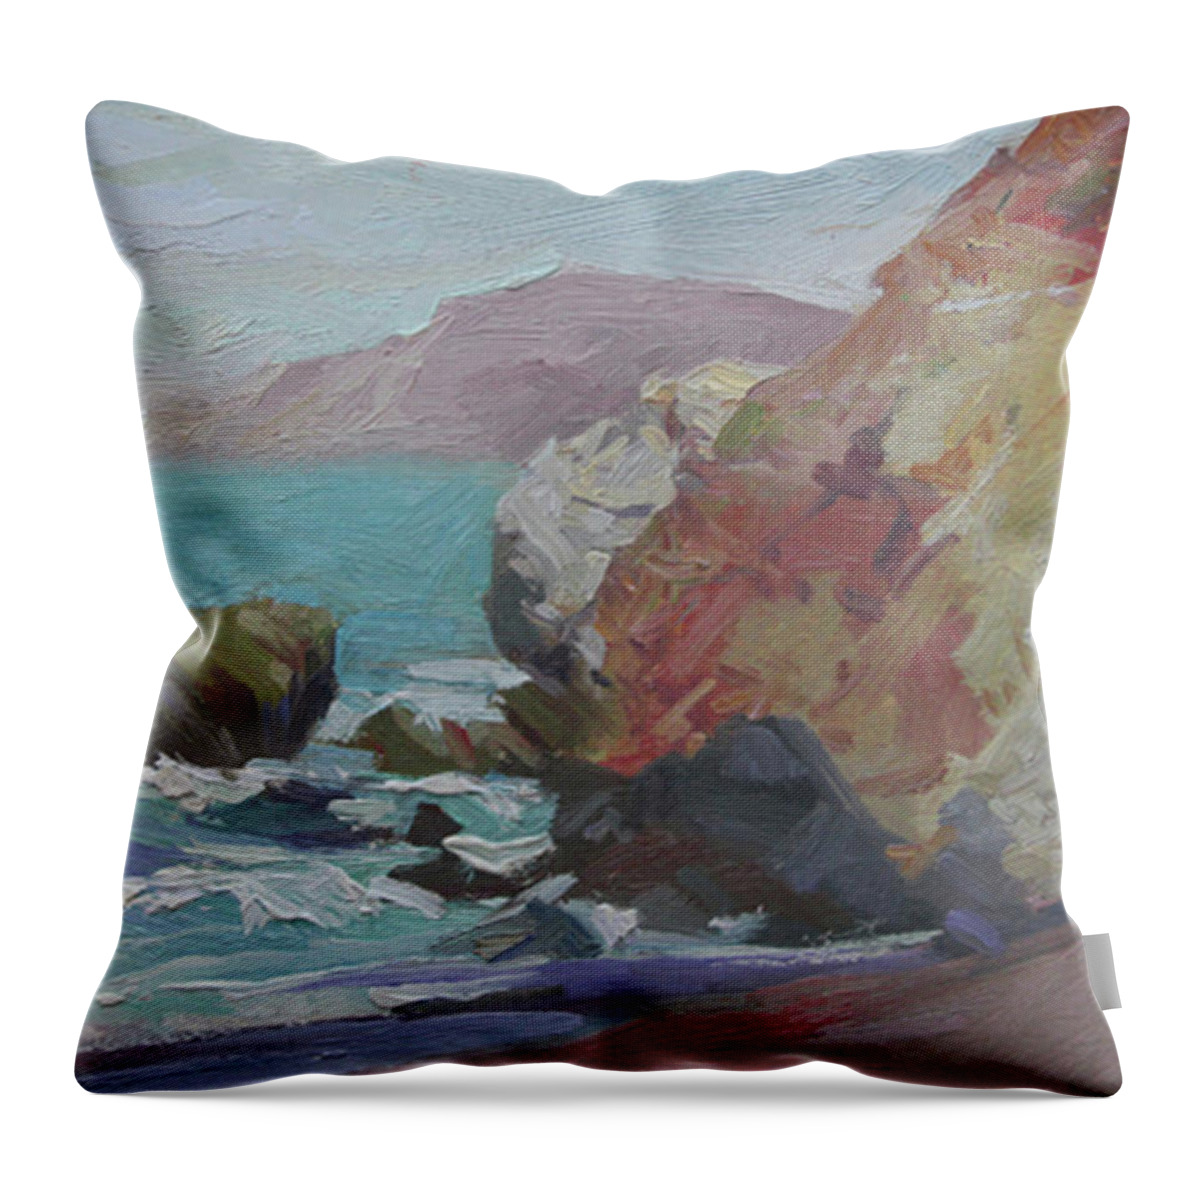 Catalina Island Plein Air Painting Throw Pillow featuring the painting Cottonwood Cove Catalina by Elizabeth - Betty Jean Billups